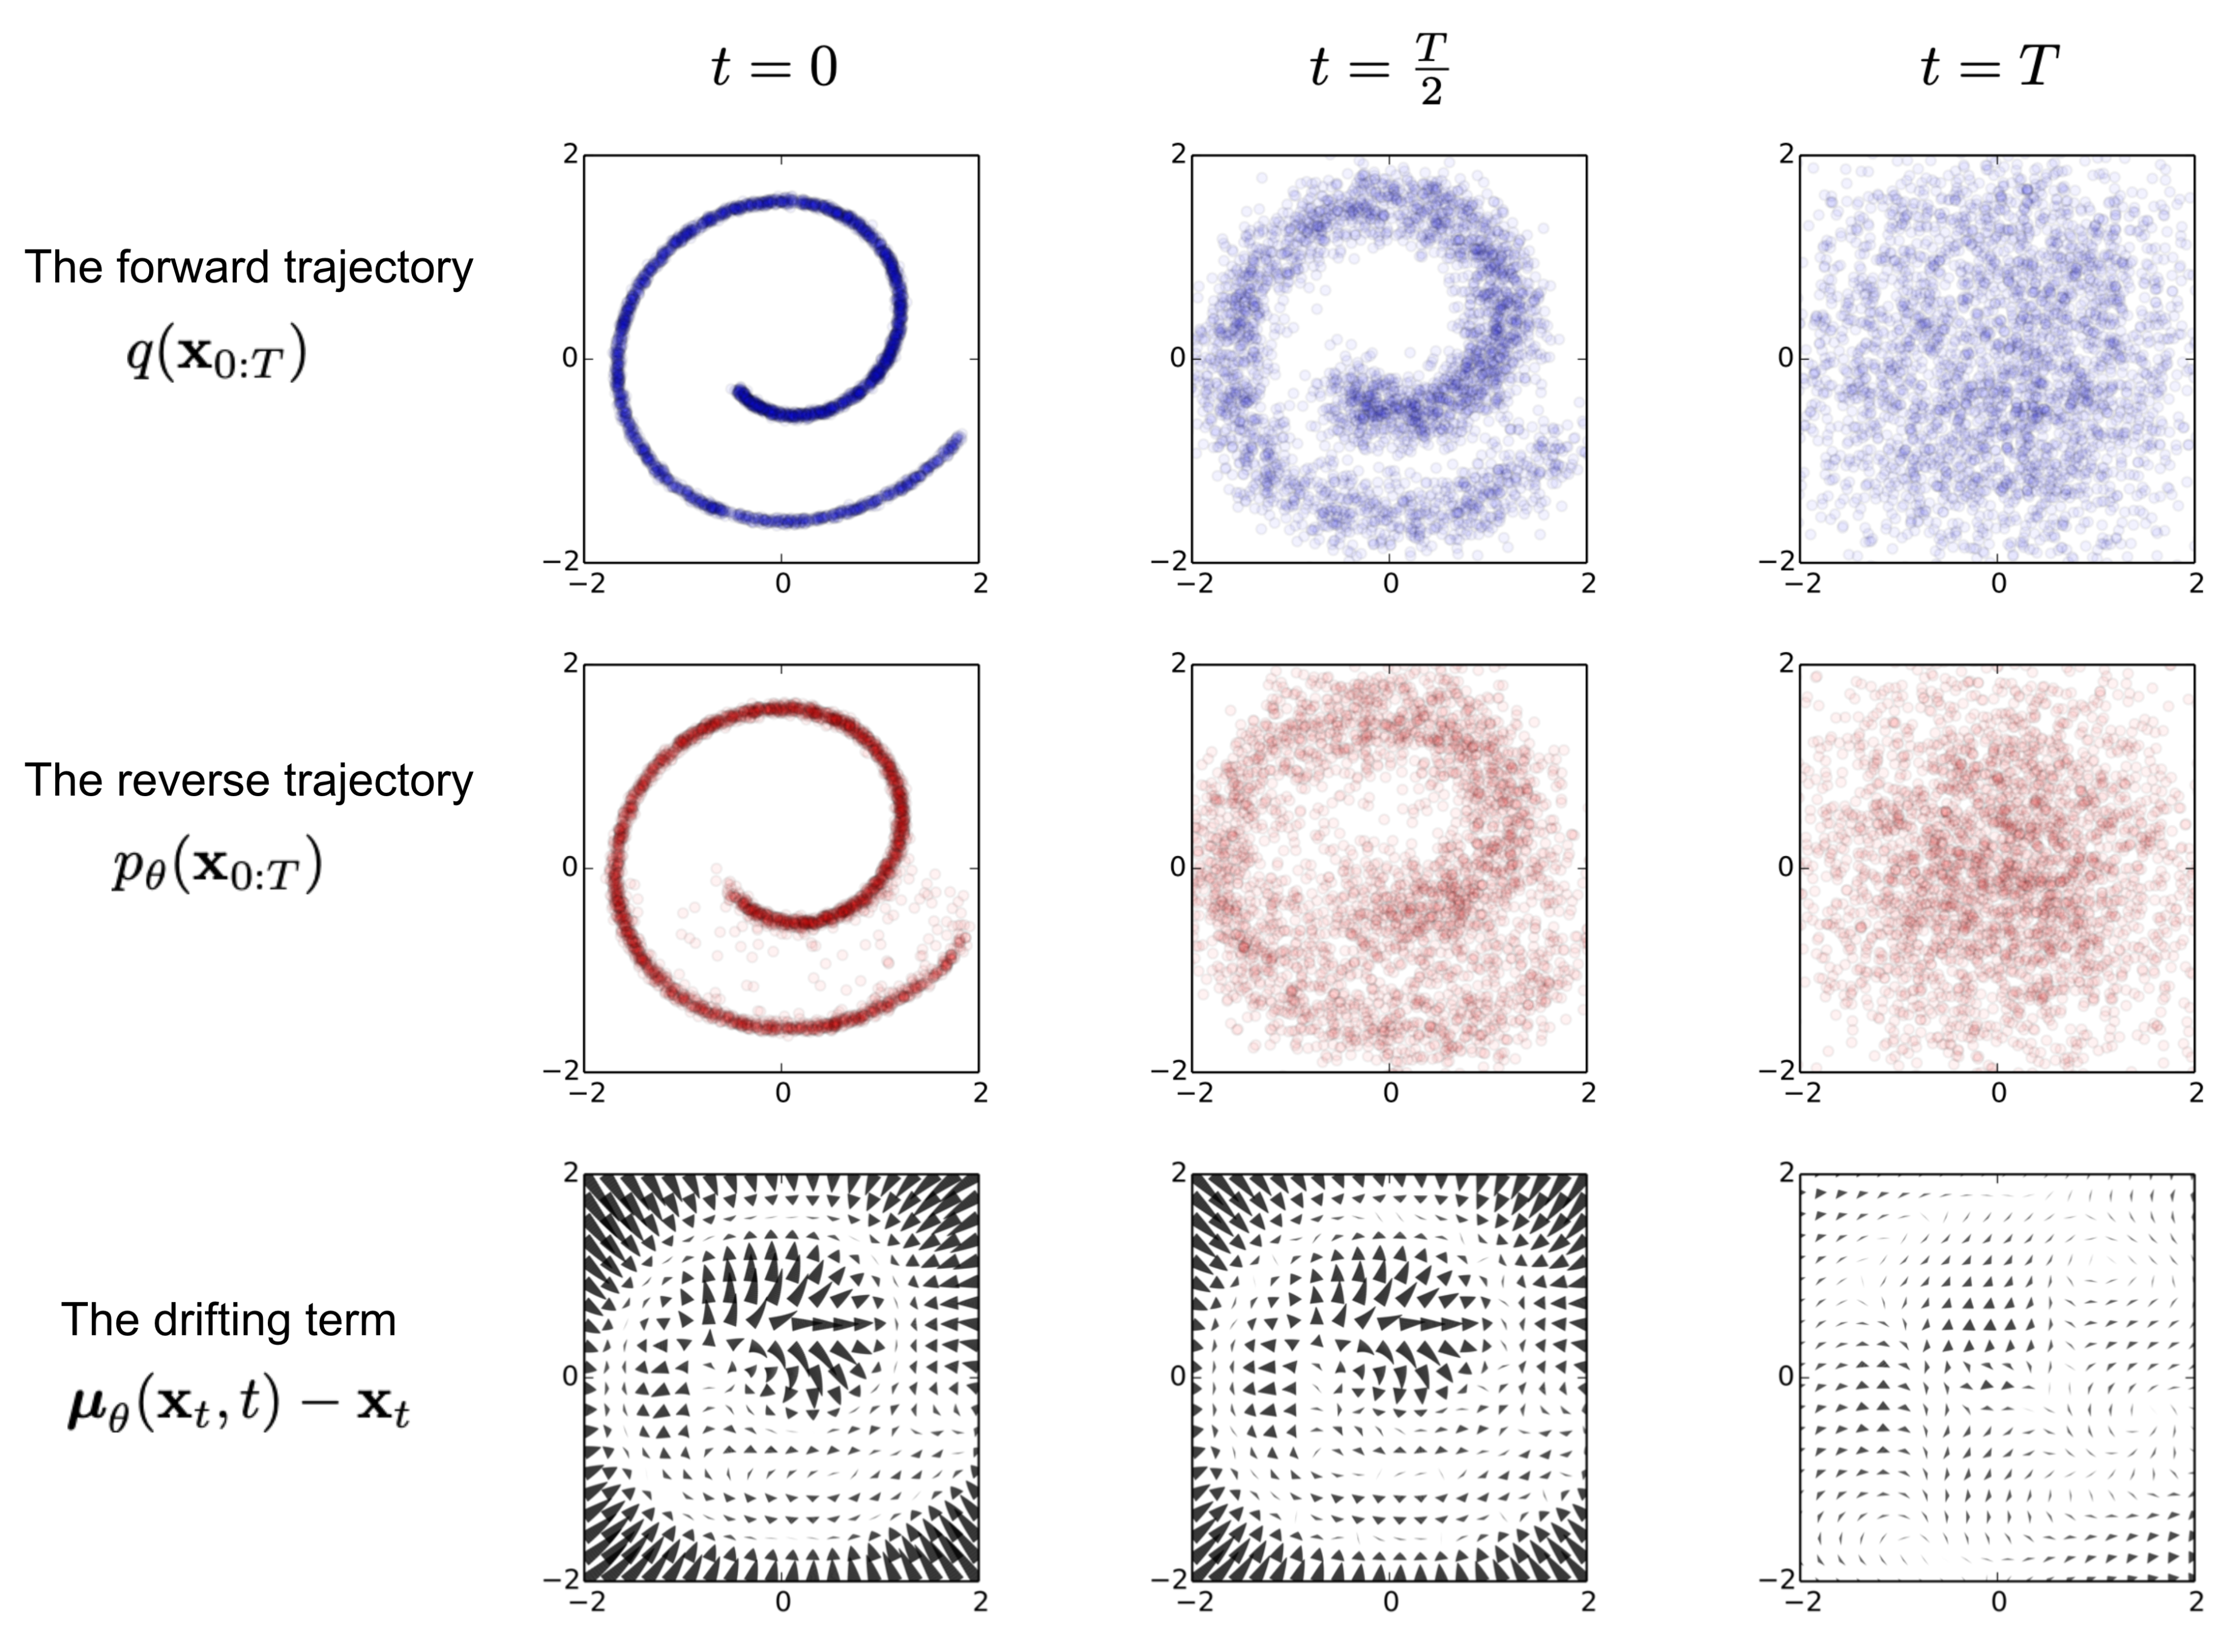 training a diffusion model for modeling a 2D Swiss roll